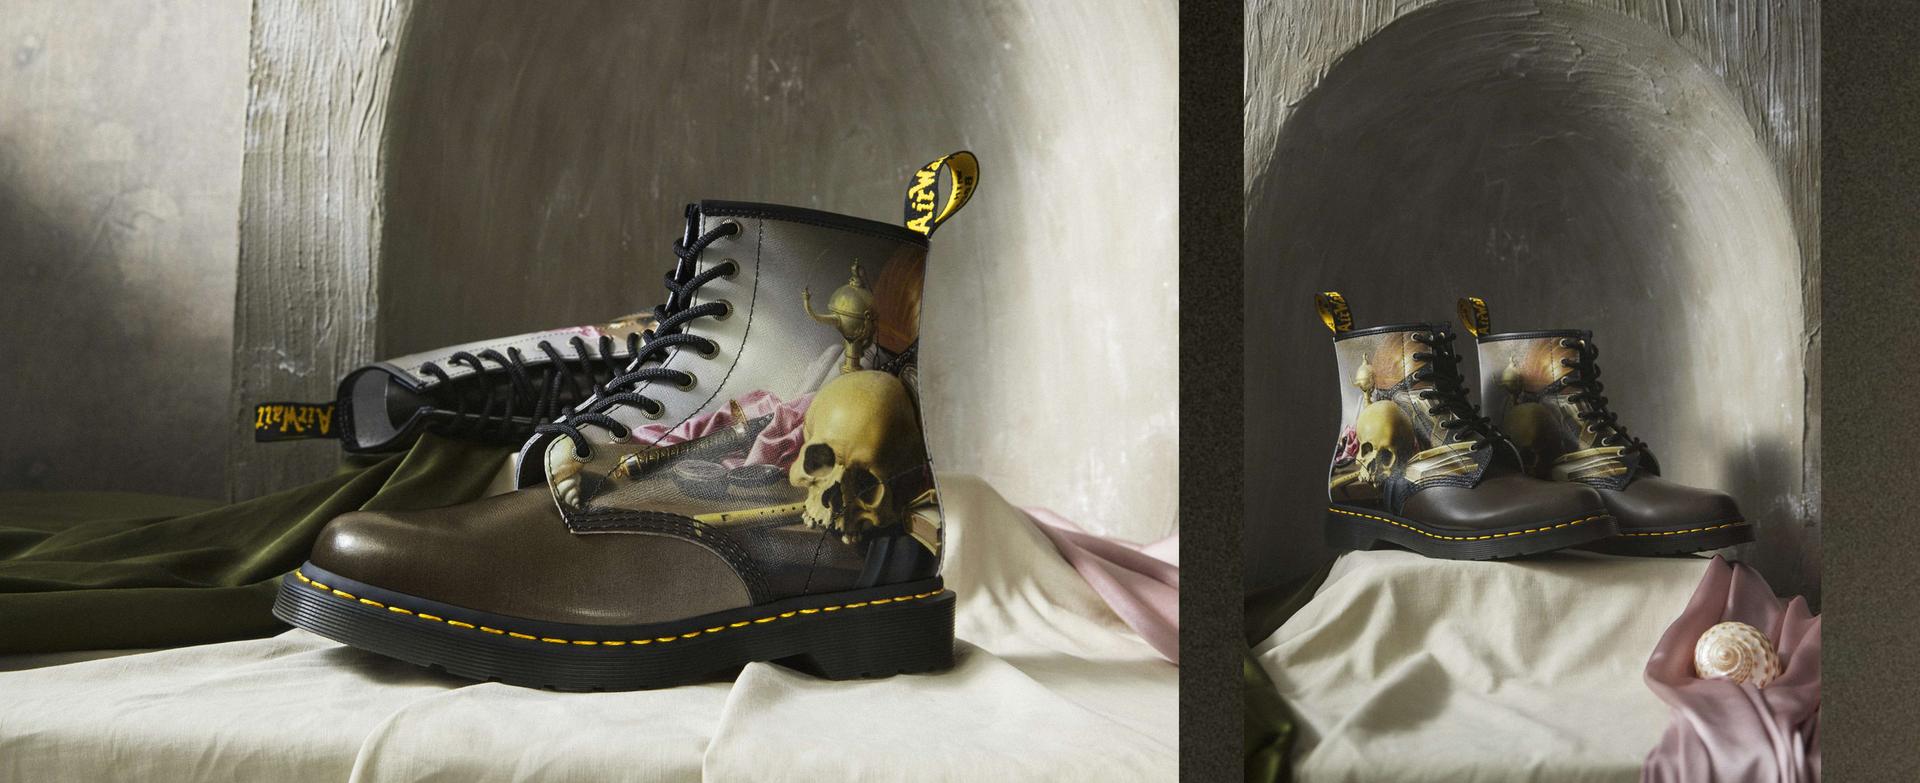 Dr. Martens x The National Gallery​